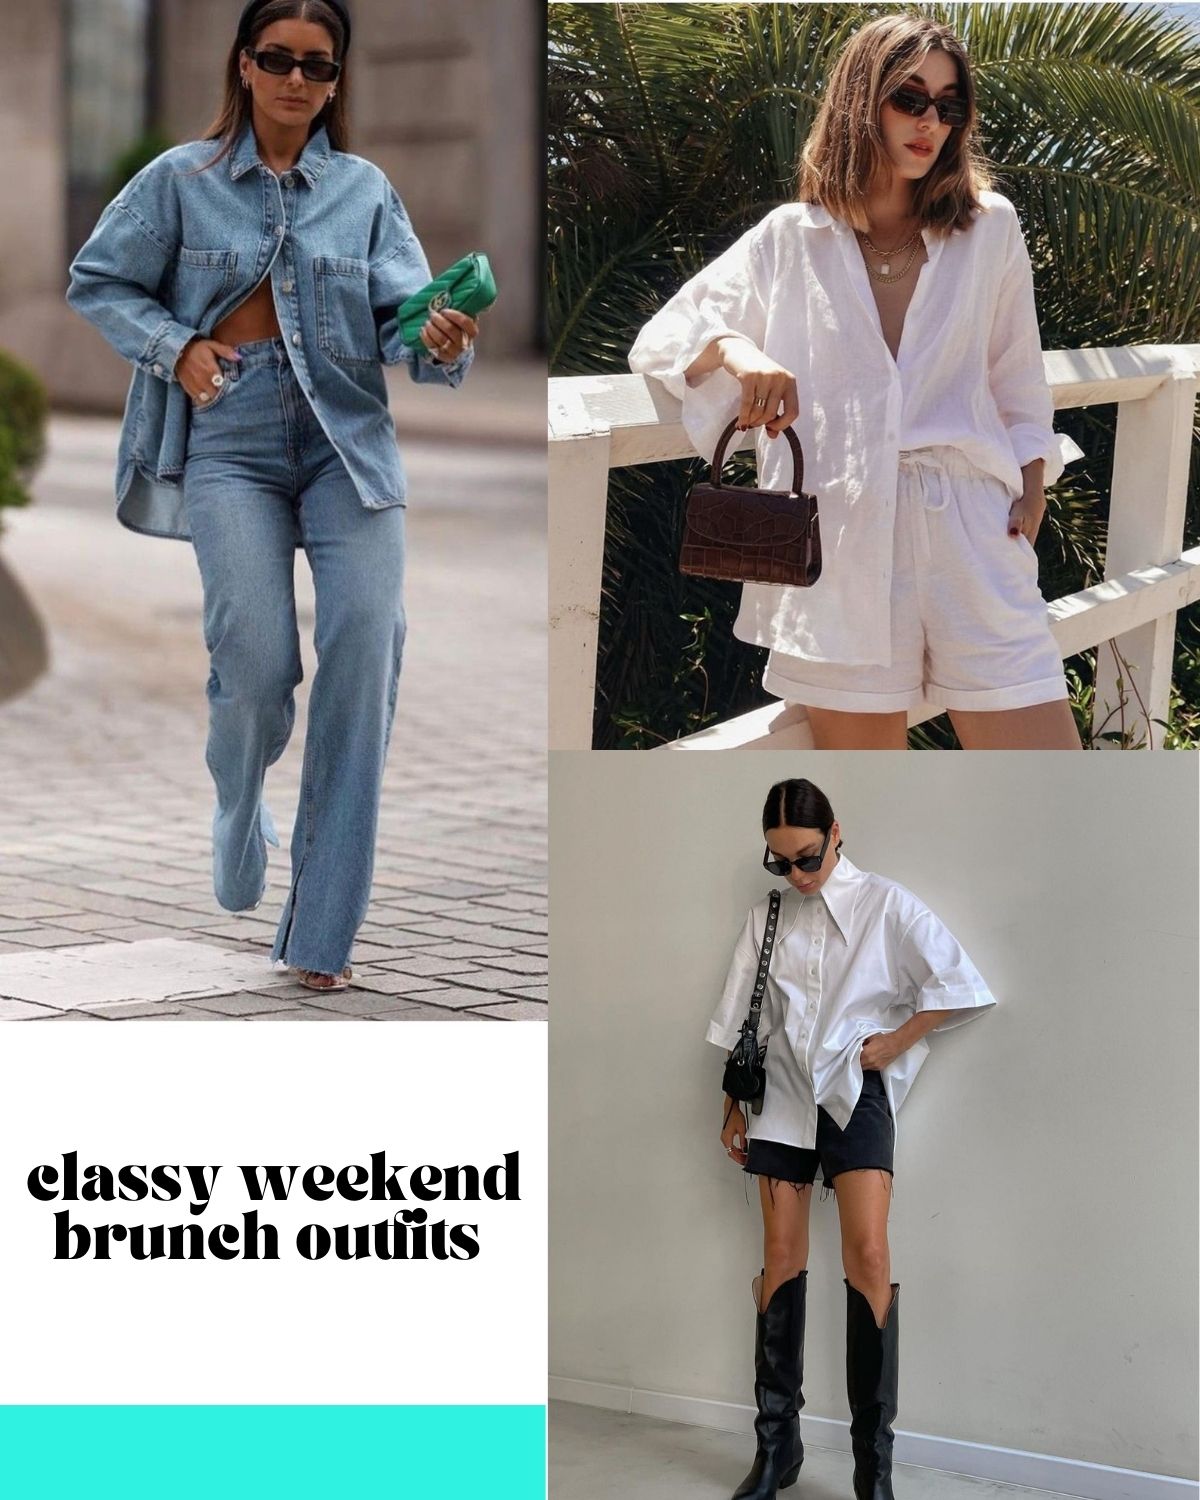 Three classy outfits for a casual brunch